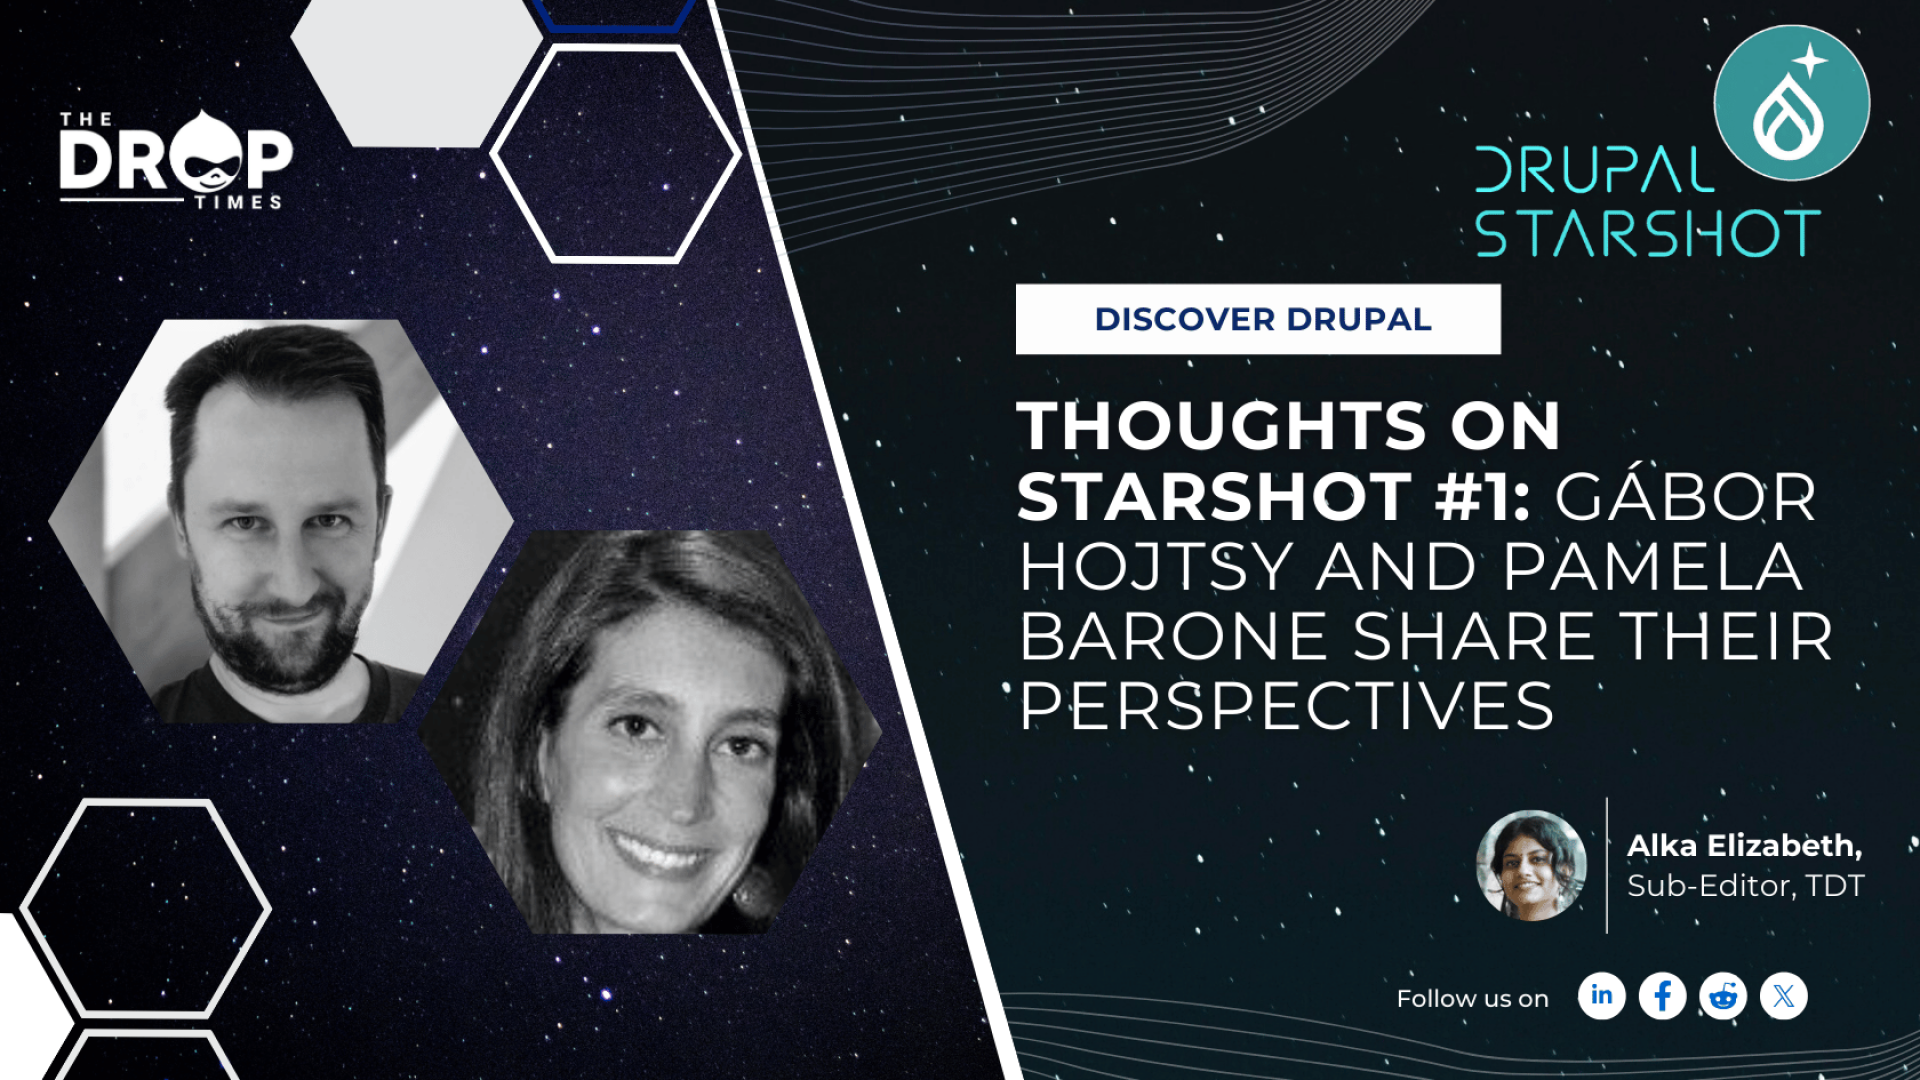 Thoughts on Starshot Initiative #1: Gábor Hojtsy and Pamela Barone share their Perspectives